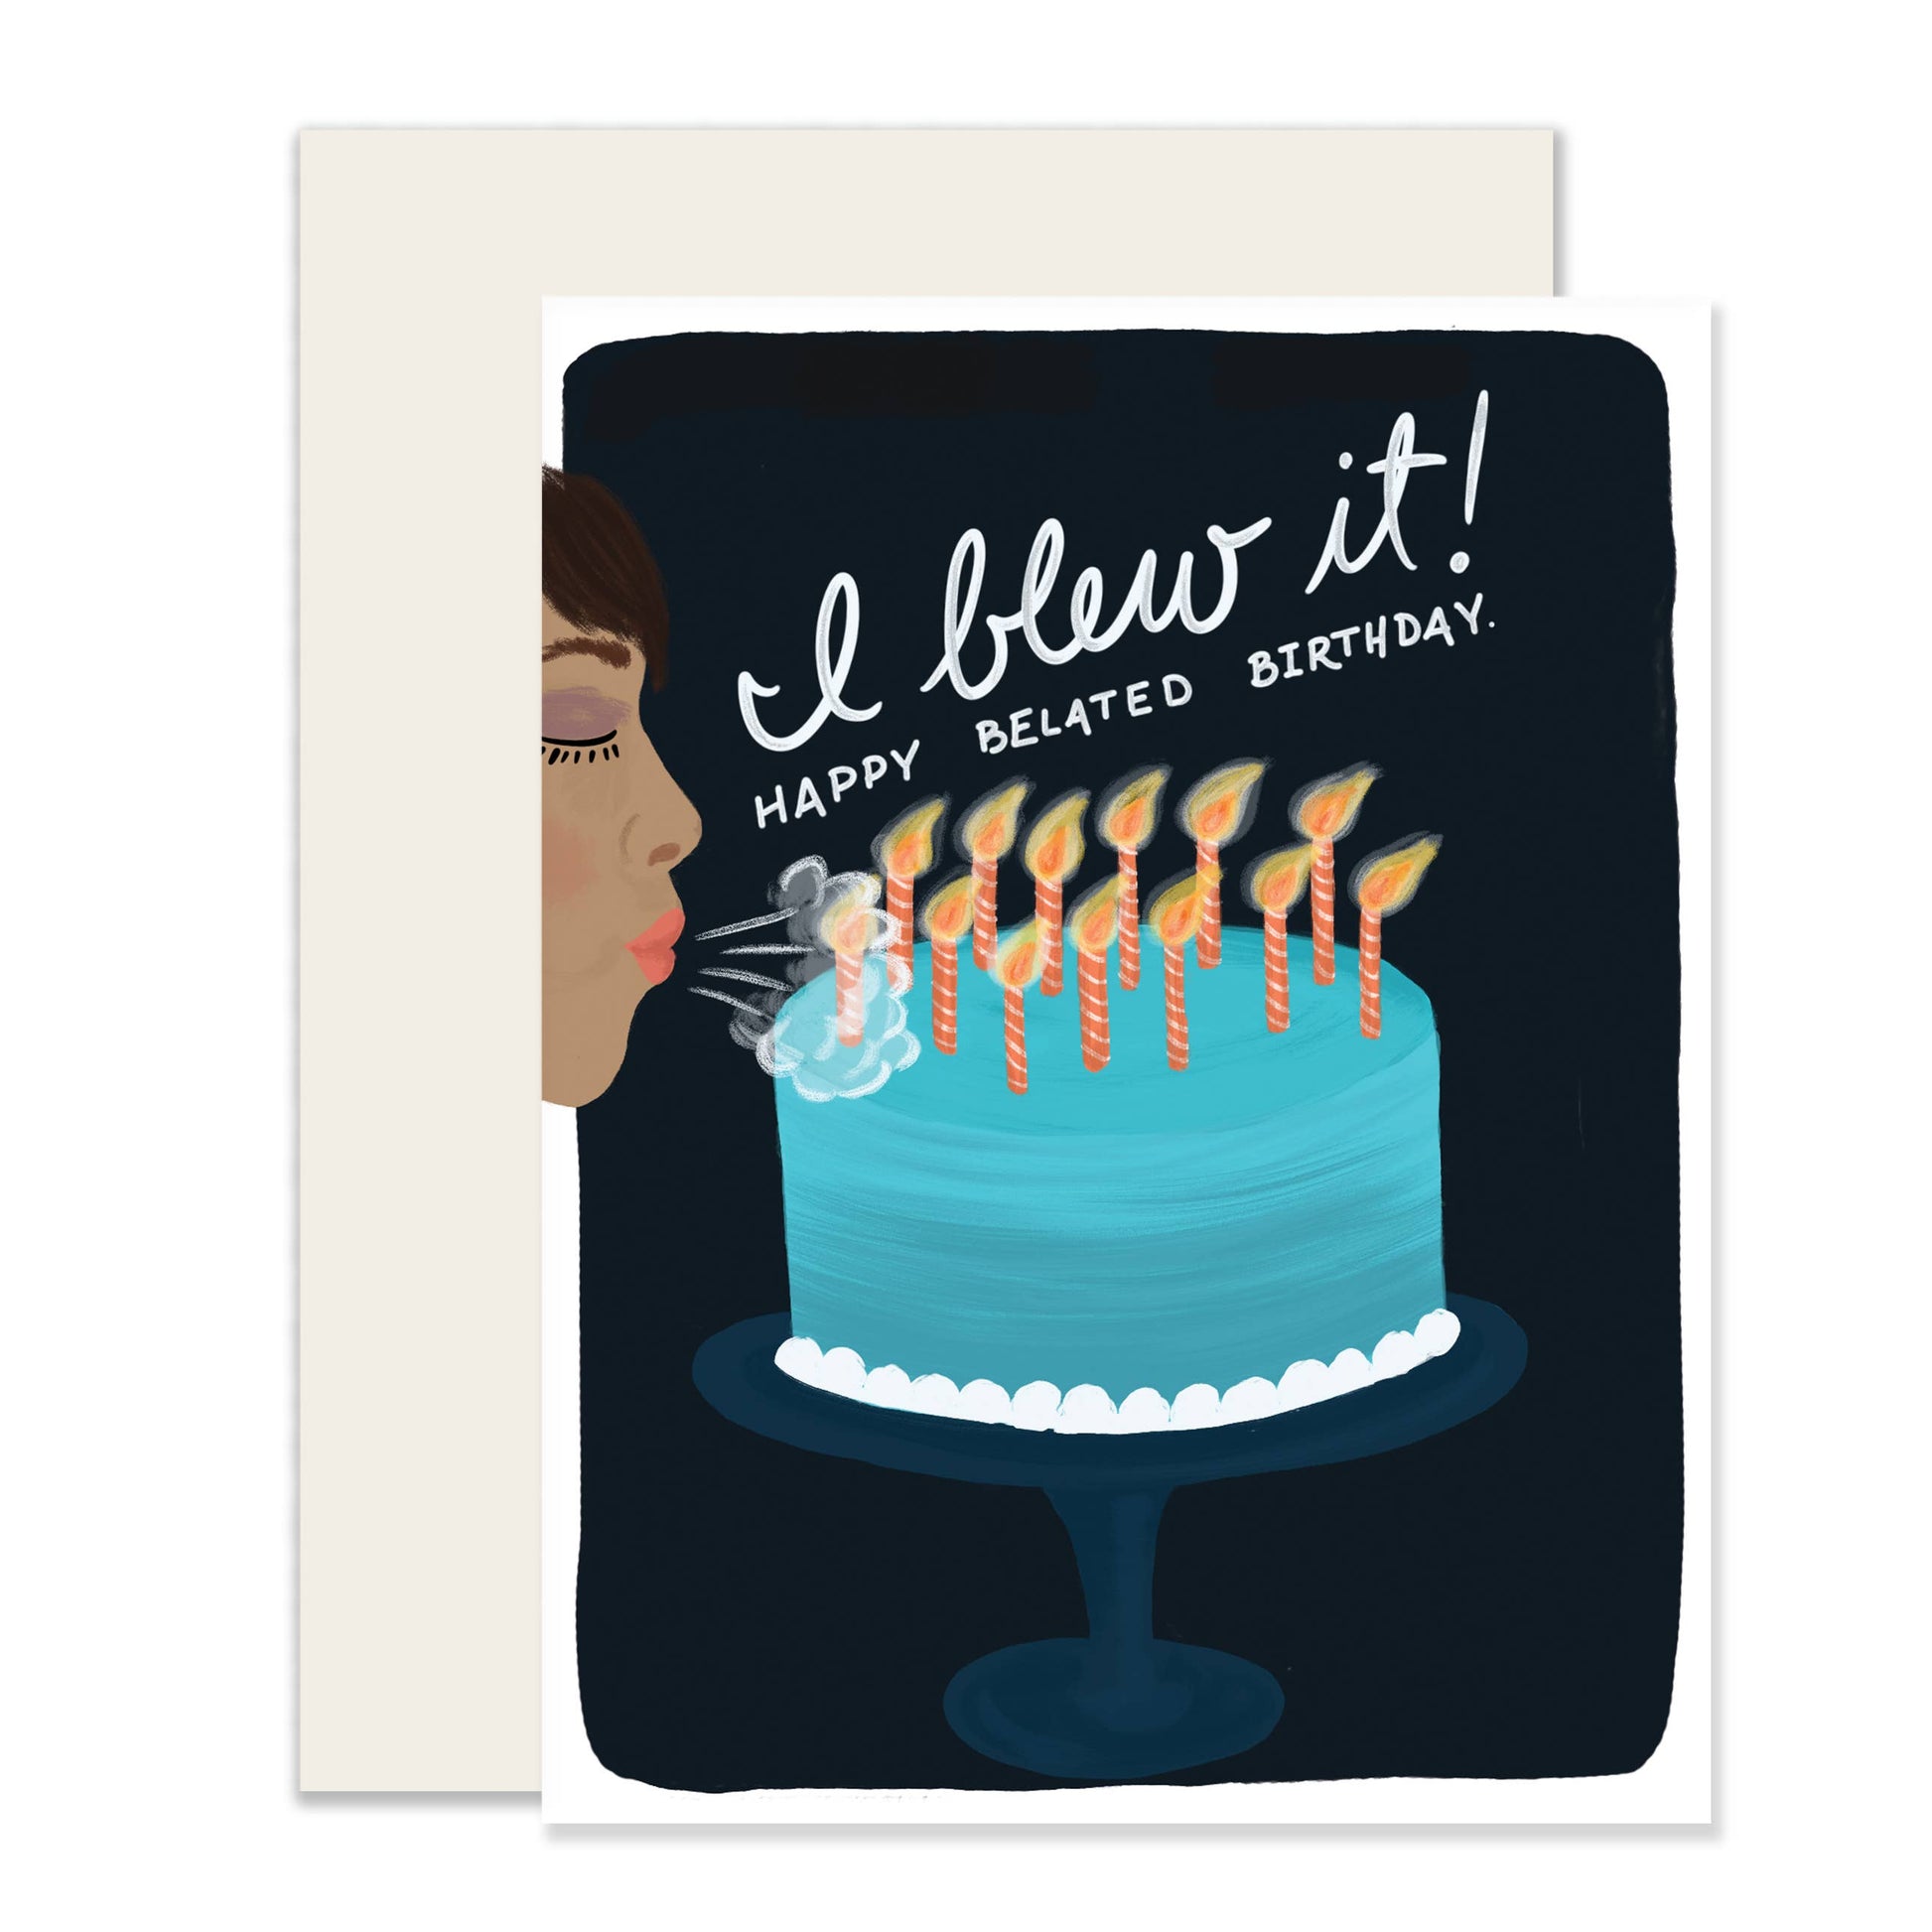 Belated birthday card -- image of person on left hand side blowing out candles on a cake towards the right.  Text reads "I blew it! Happy belated birthday." 